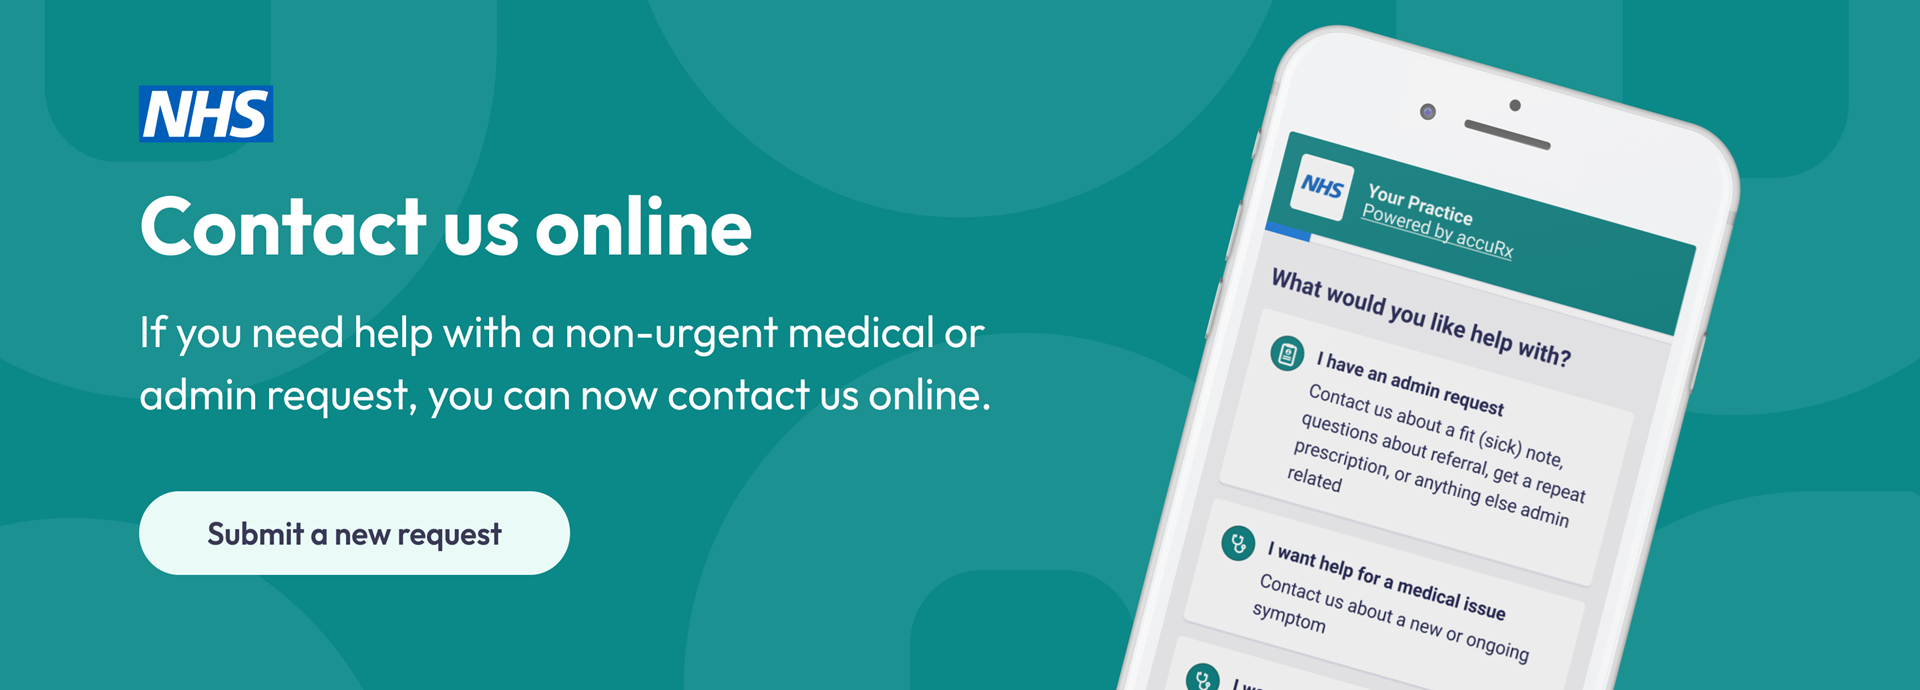 Contact us online for non-urgent medical conditions